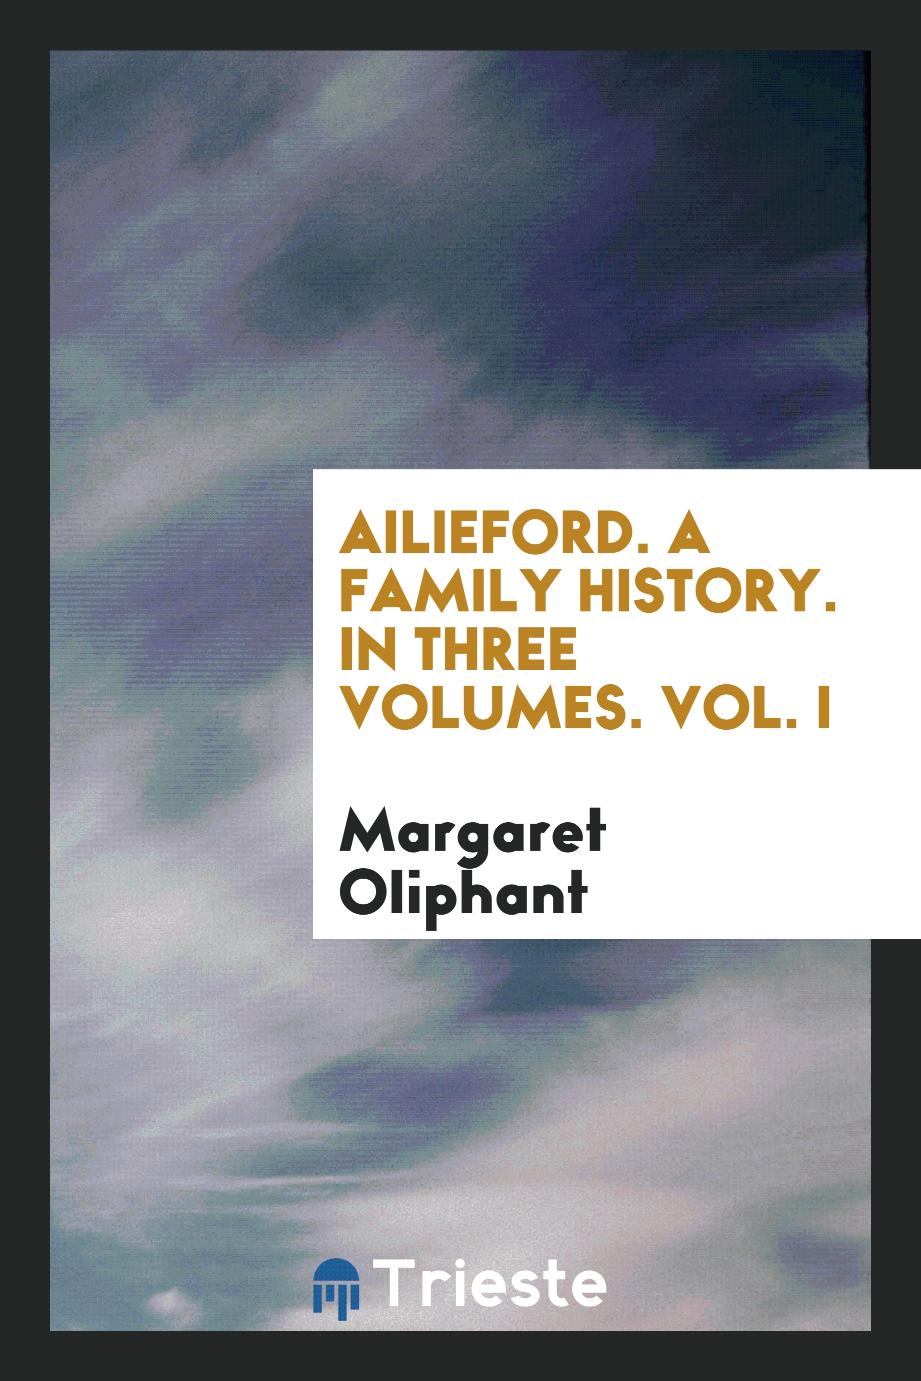 Ailieford. A Family History. In Three Volumes. Vol. I